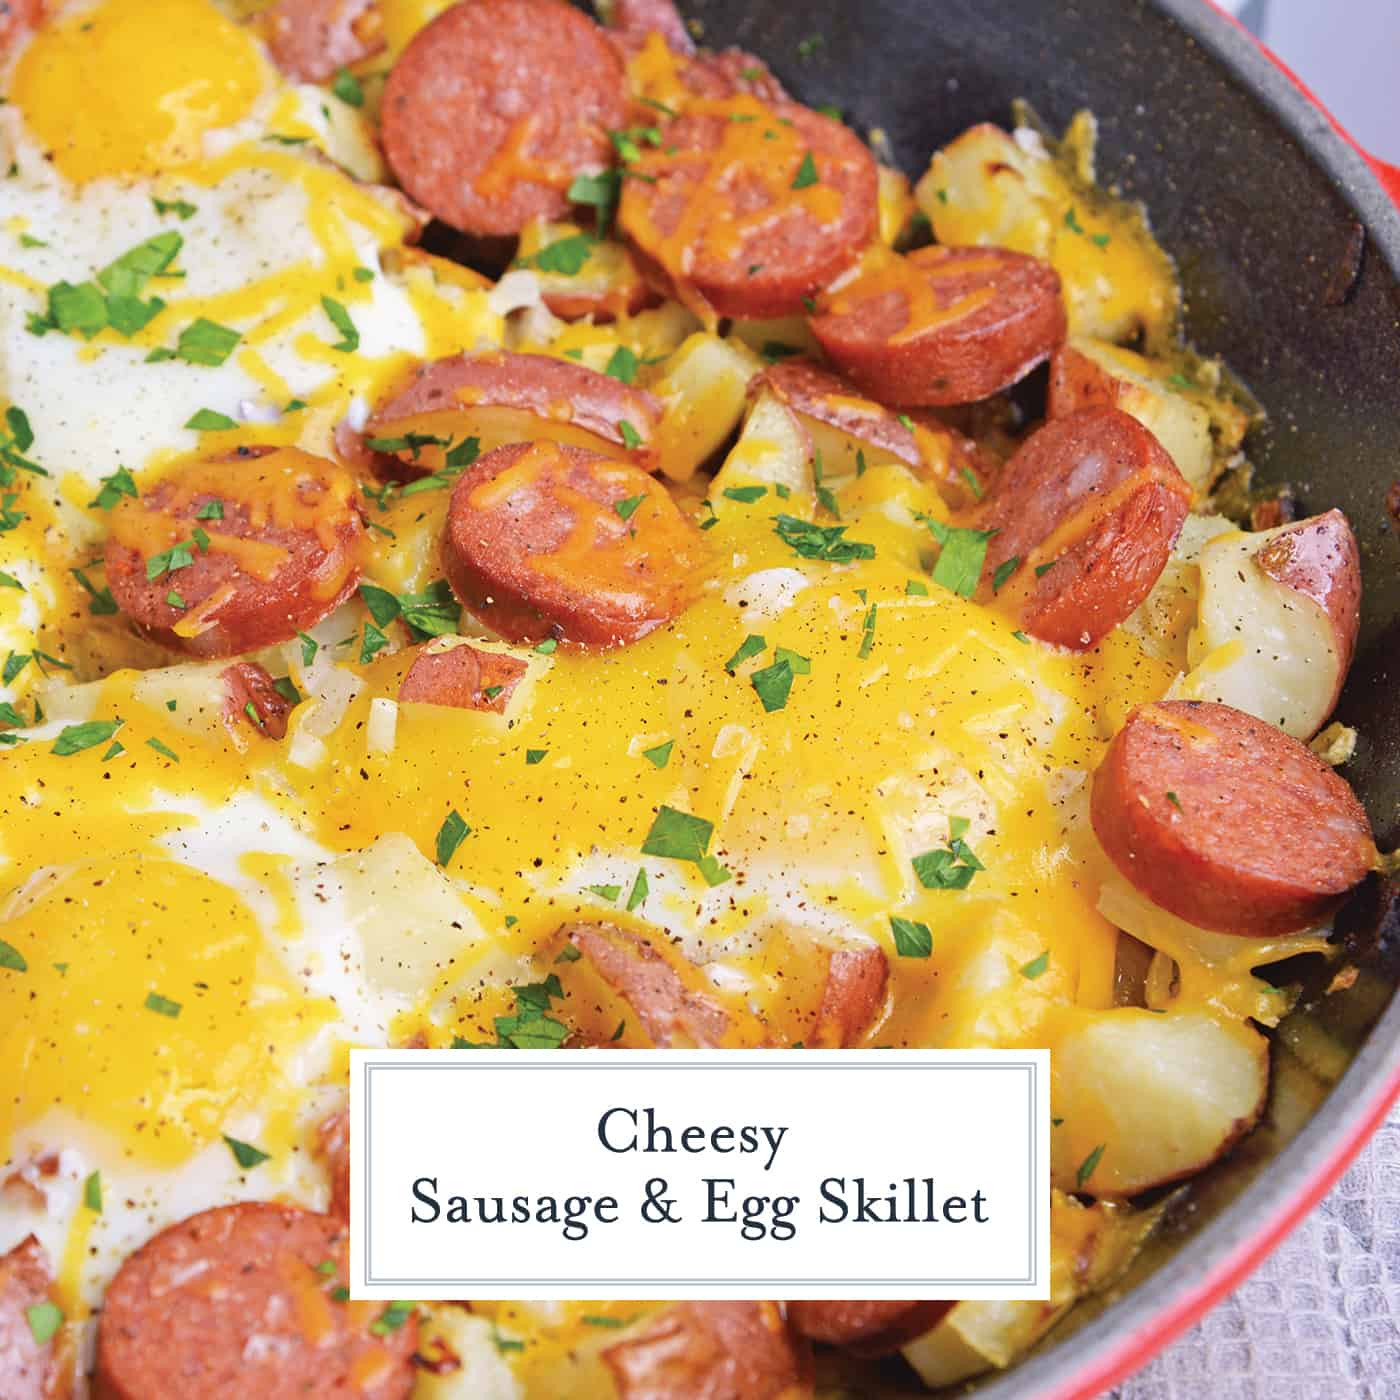 Eggs And Sausage Breakfast Ideas
 Sausage and Egg Skillet A Breakfast Skillet Recipe